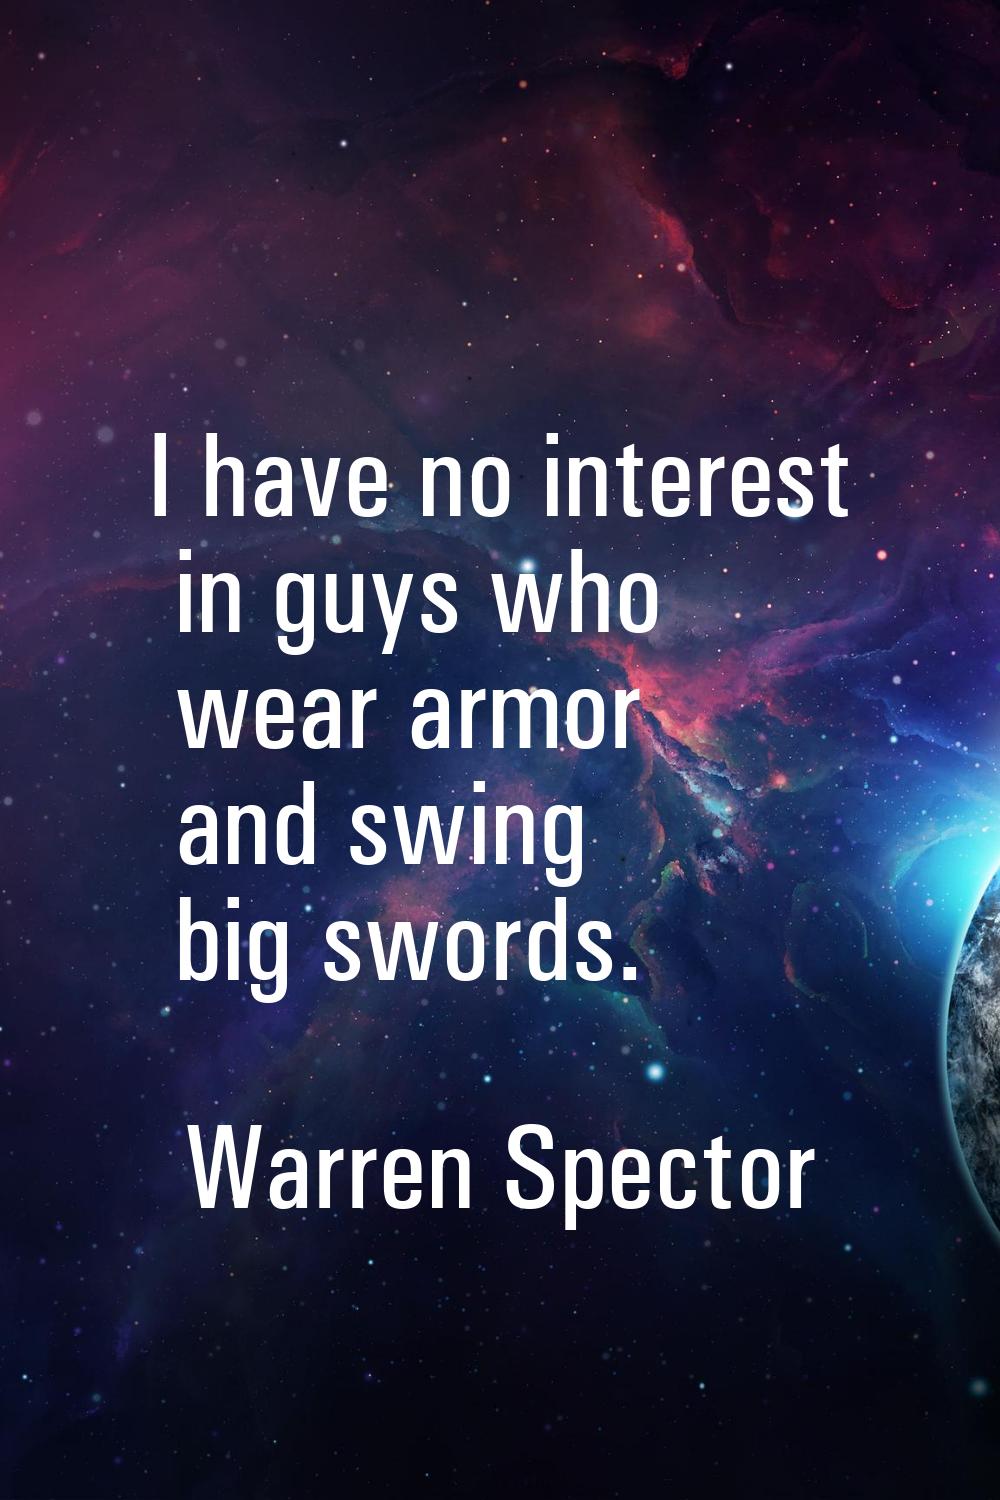 I have no interest in guys who wear armor and swing big swords.